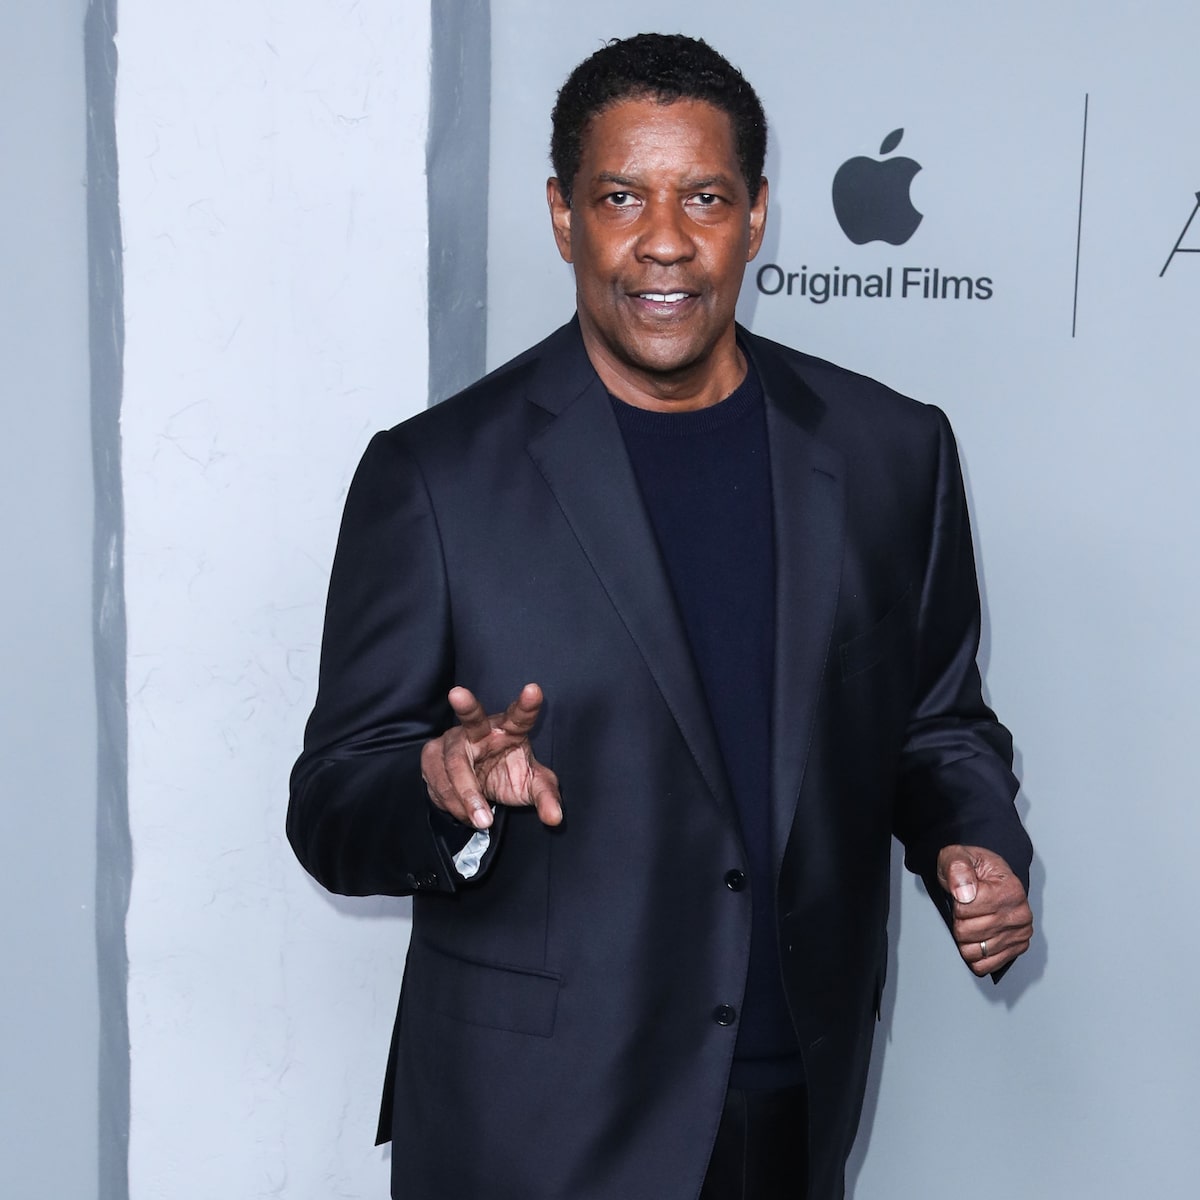 Does Denzel Washington Have A Disease? Fans Are Concerned About His Health